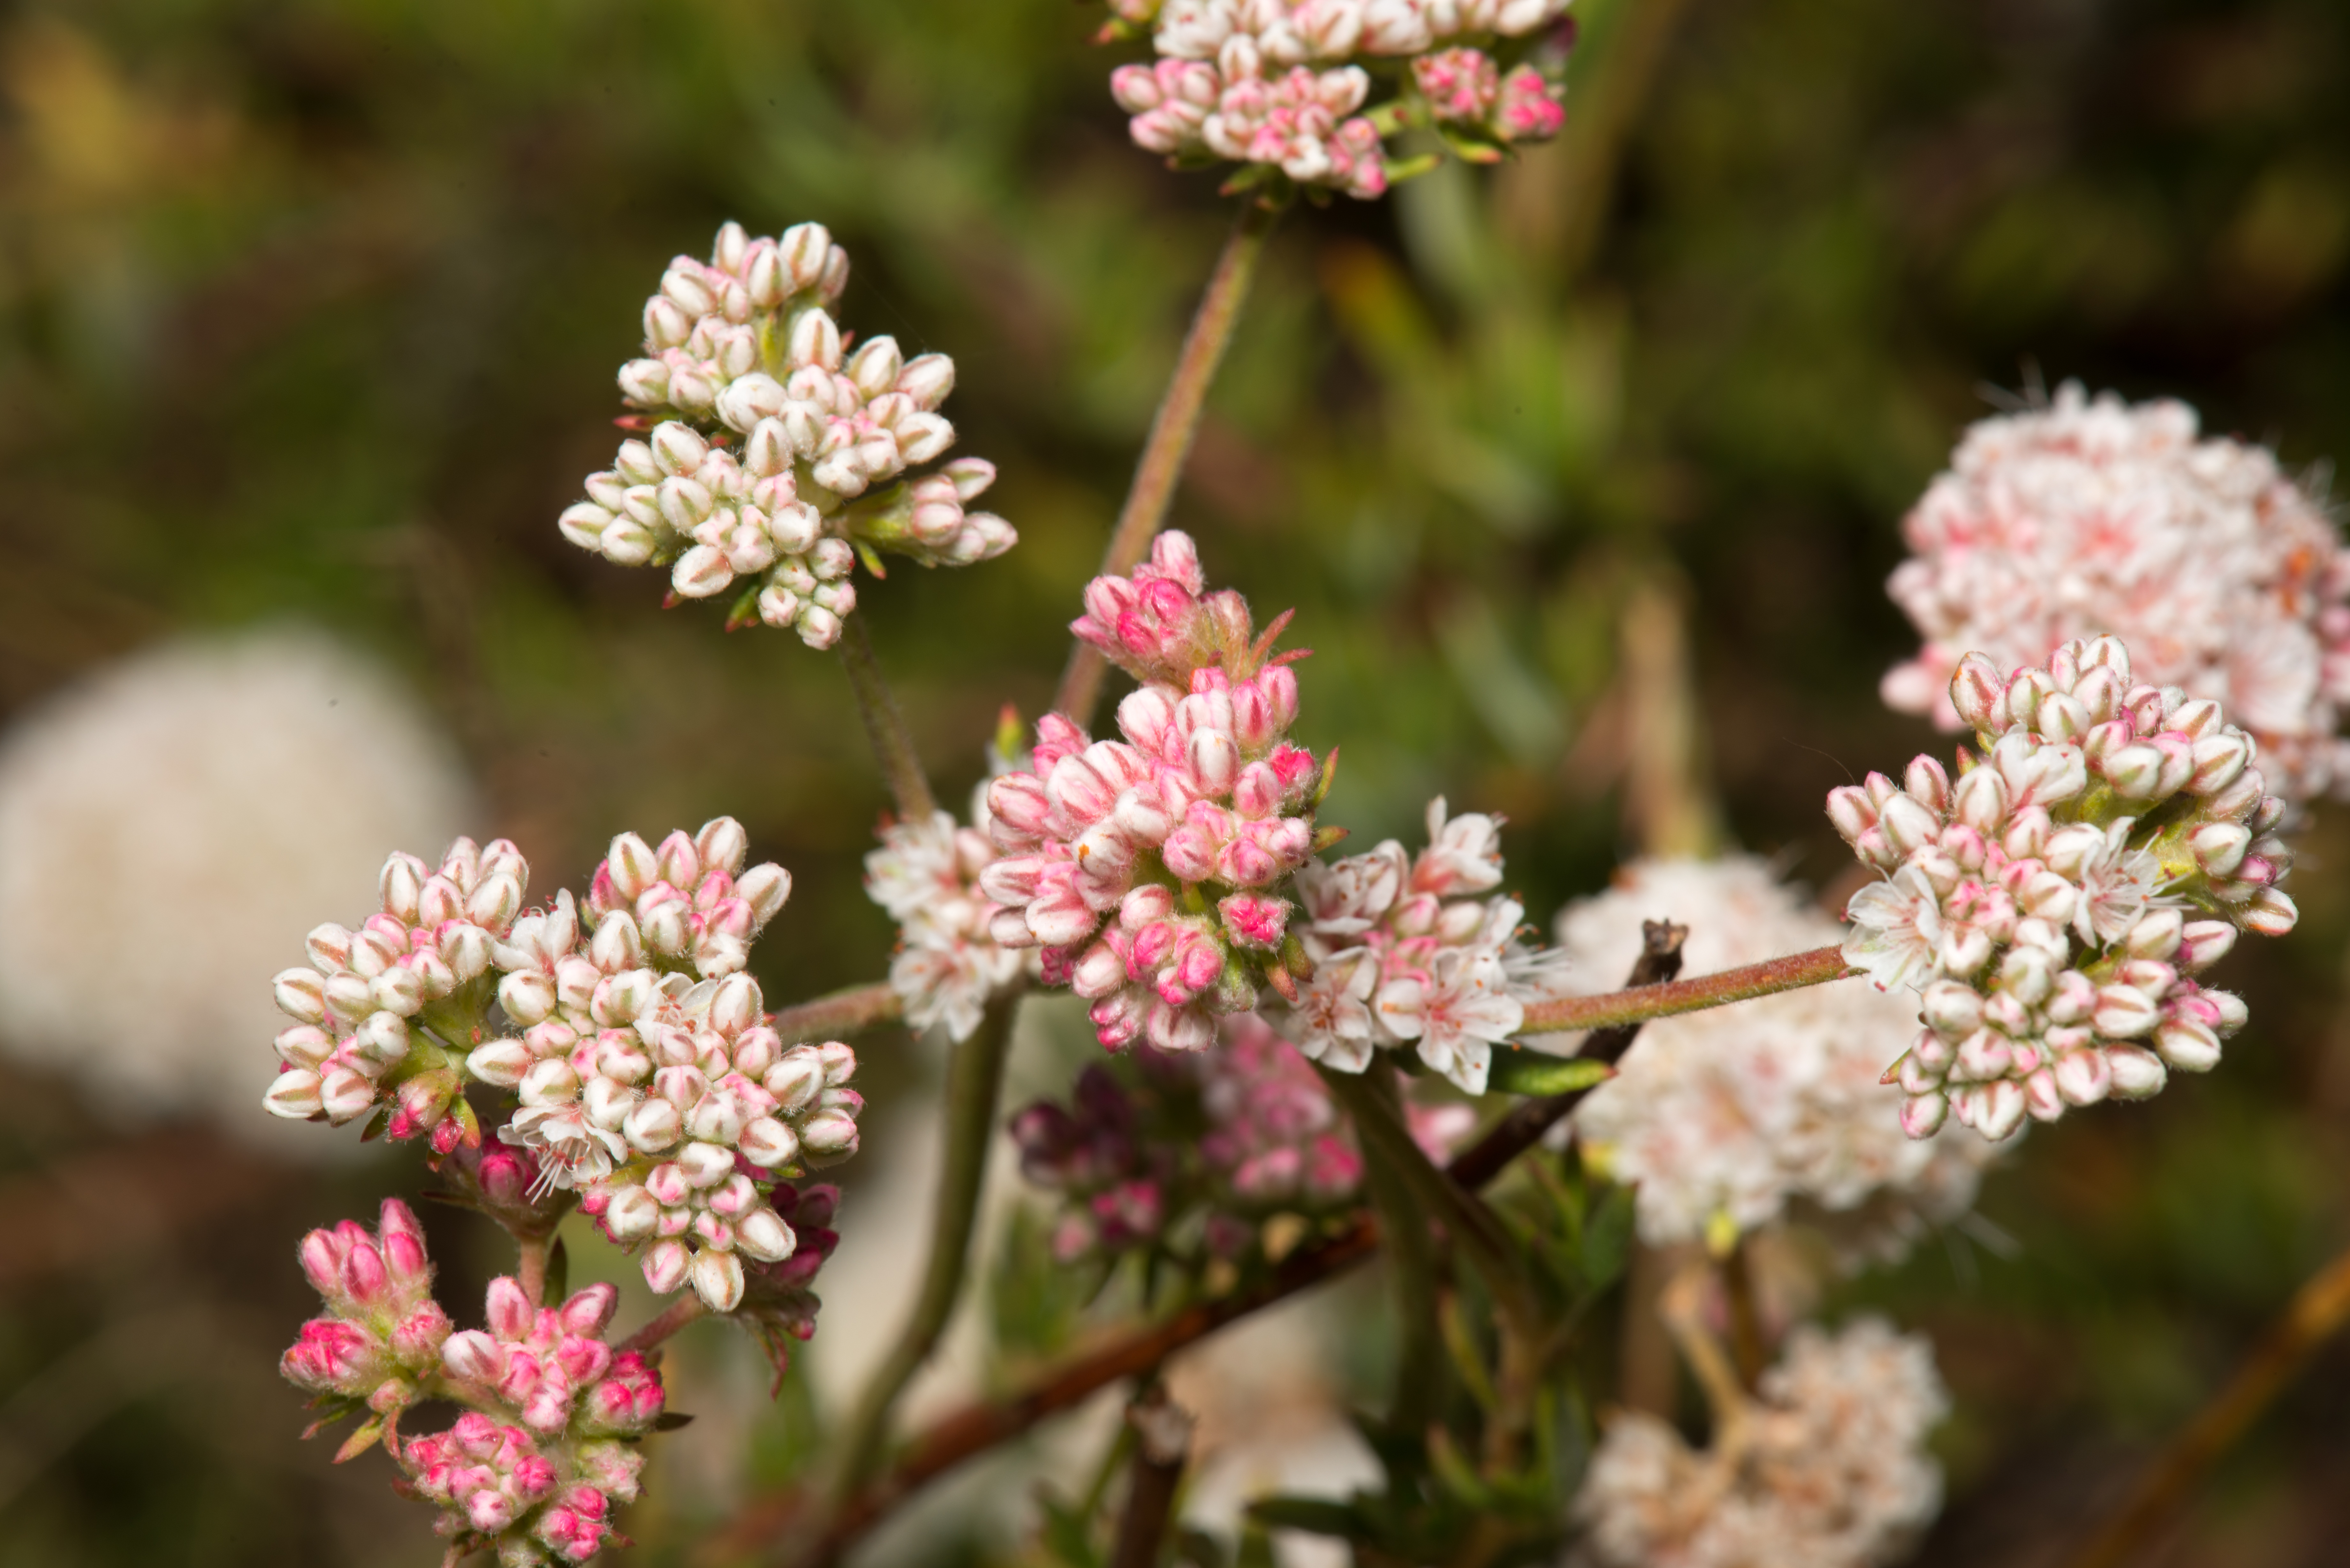 Small white and pink flower buds on bush, Blossom, Field, Flower, Landscape, HQ Photo